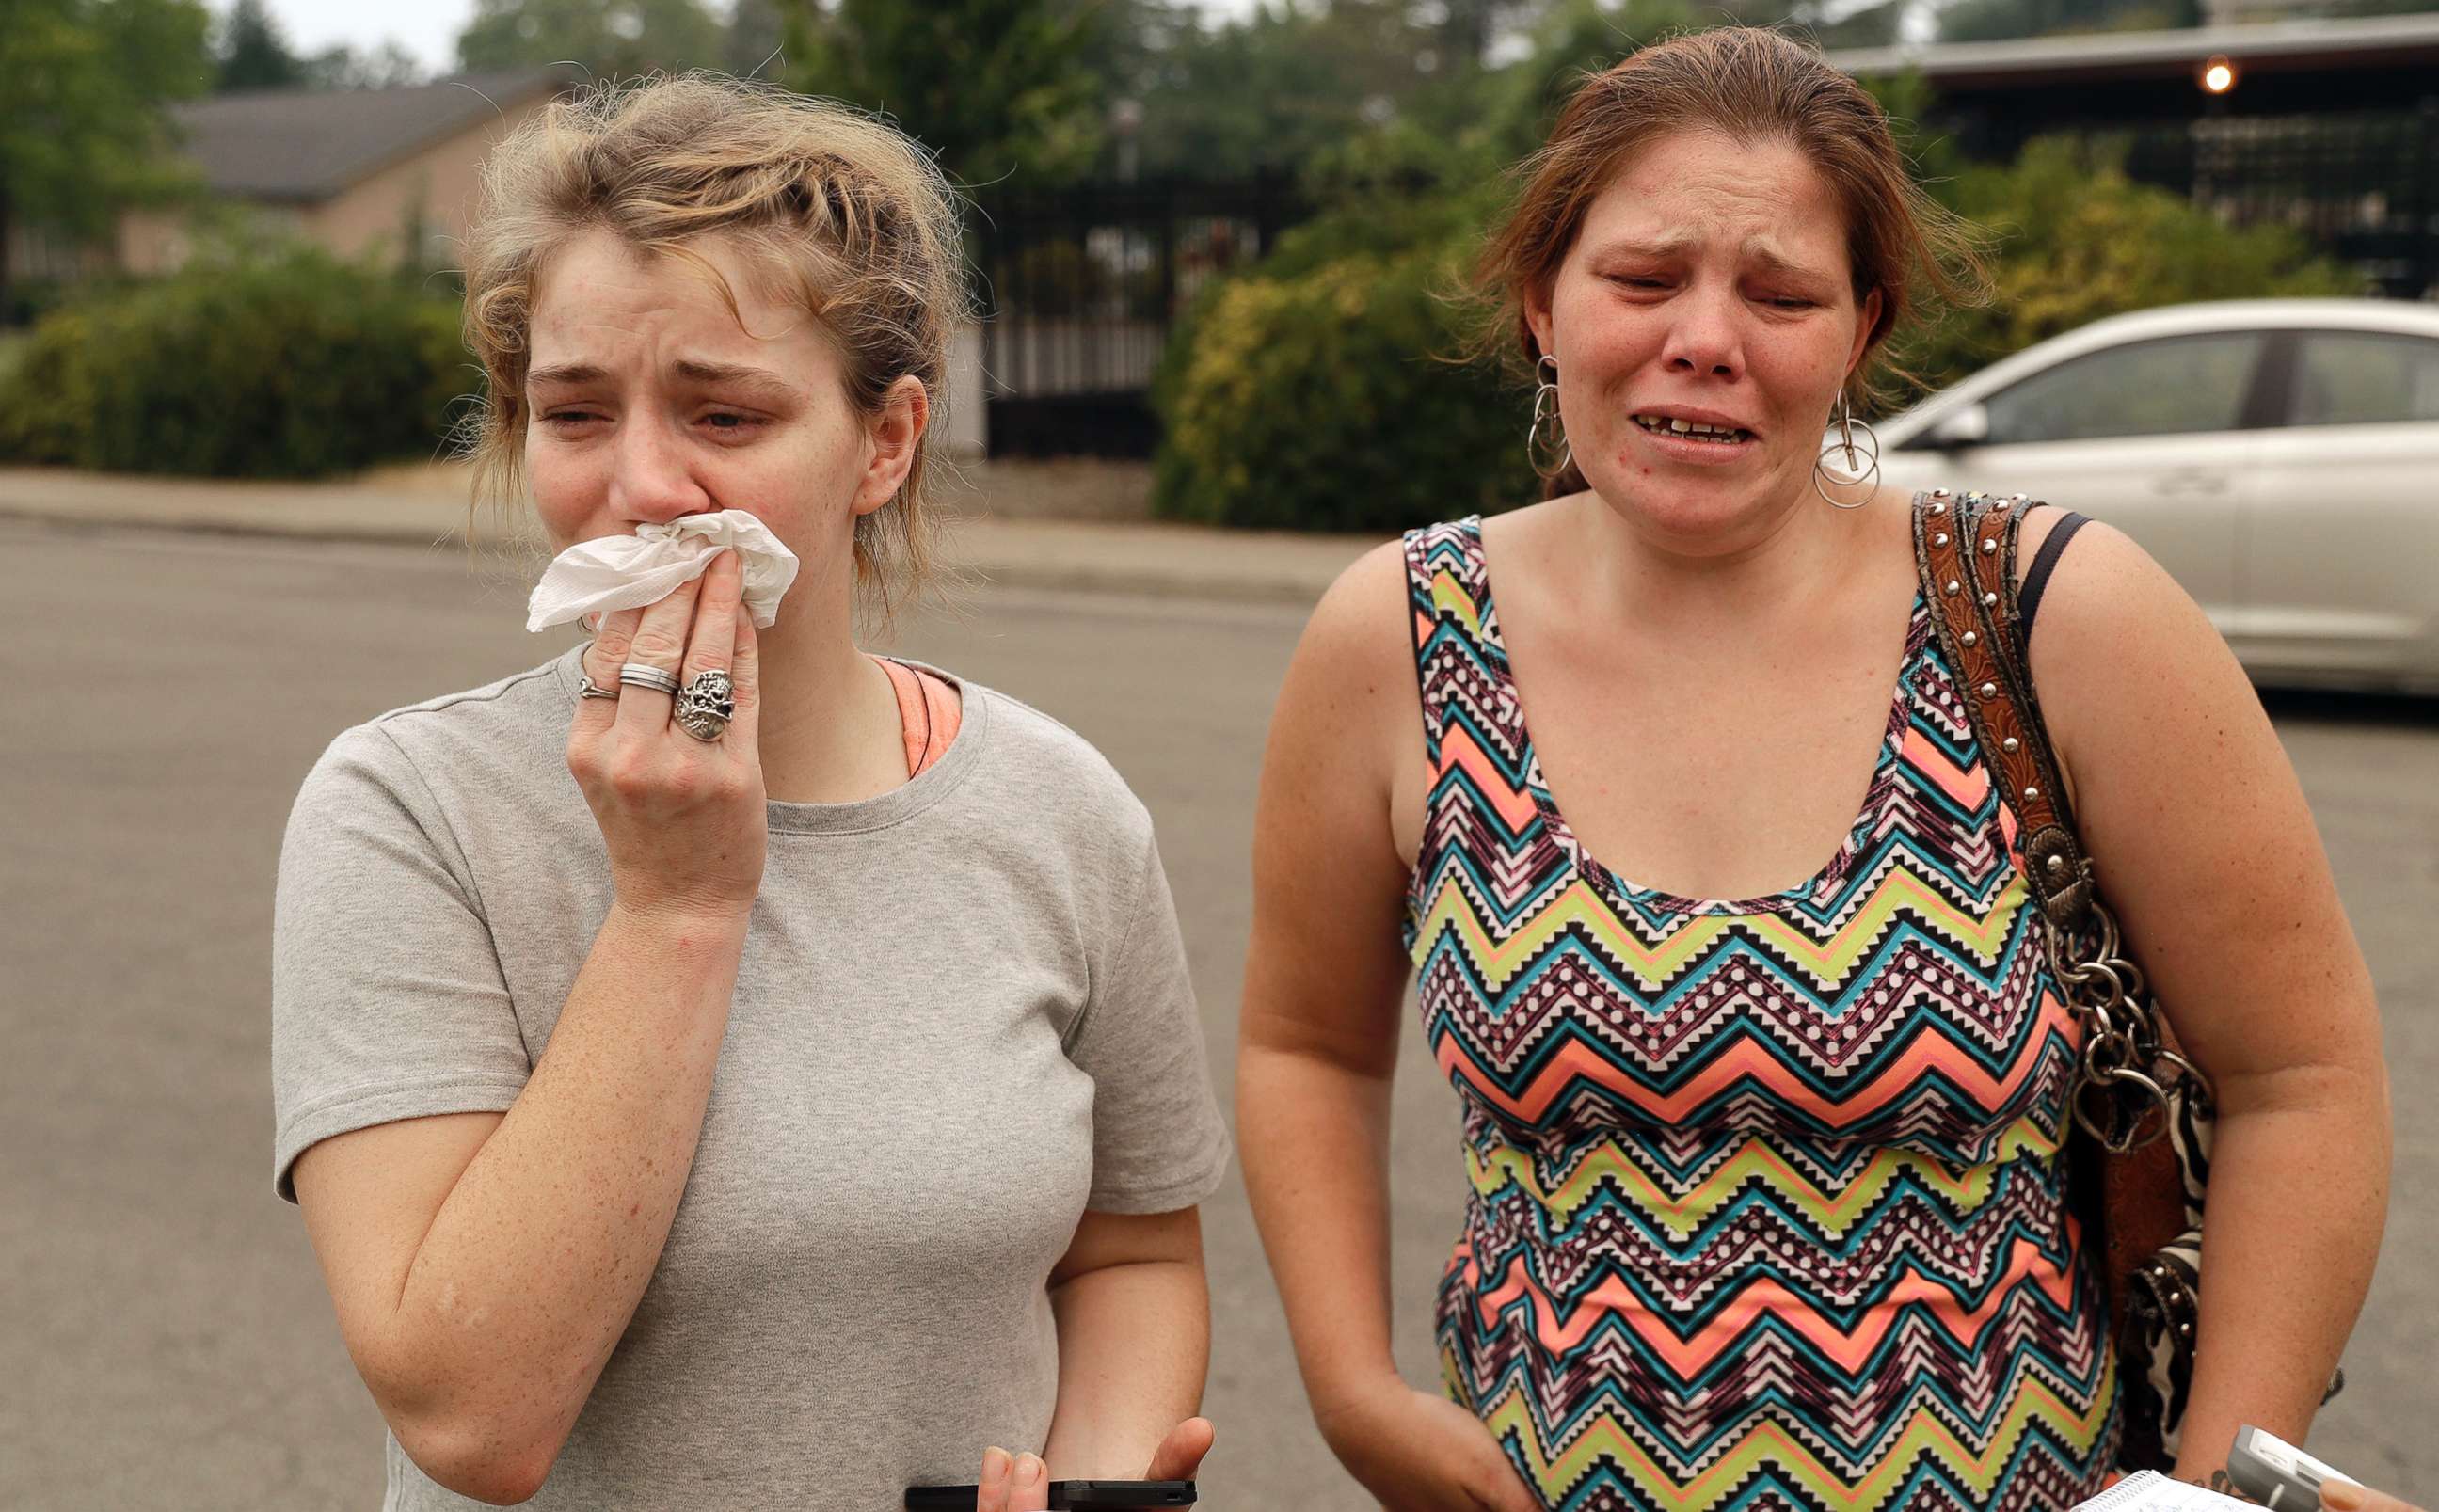 PHOTO: Sherry Bledsoe, left, cries next to her sister, Carla, outside of the sheriff's office after hearing news that Sherry's children, James and Emily, and grandmother, Melody Bledsoe, were killed in a wildfire, July 28, 2018, in Redding, Calif.